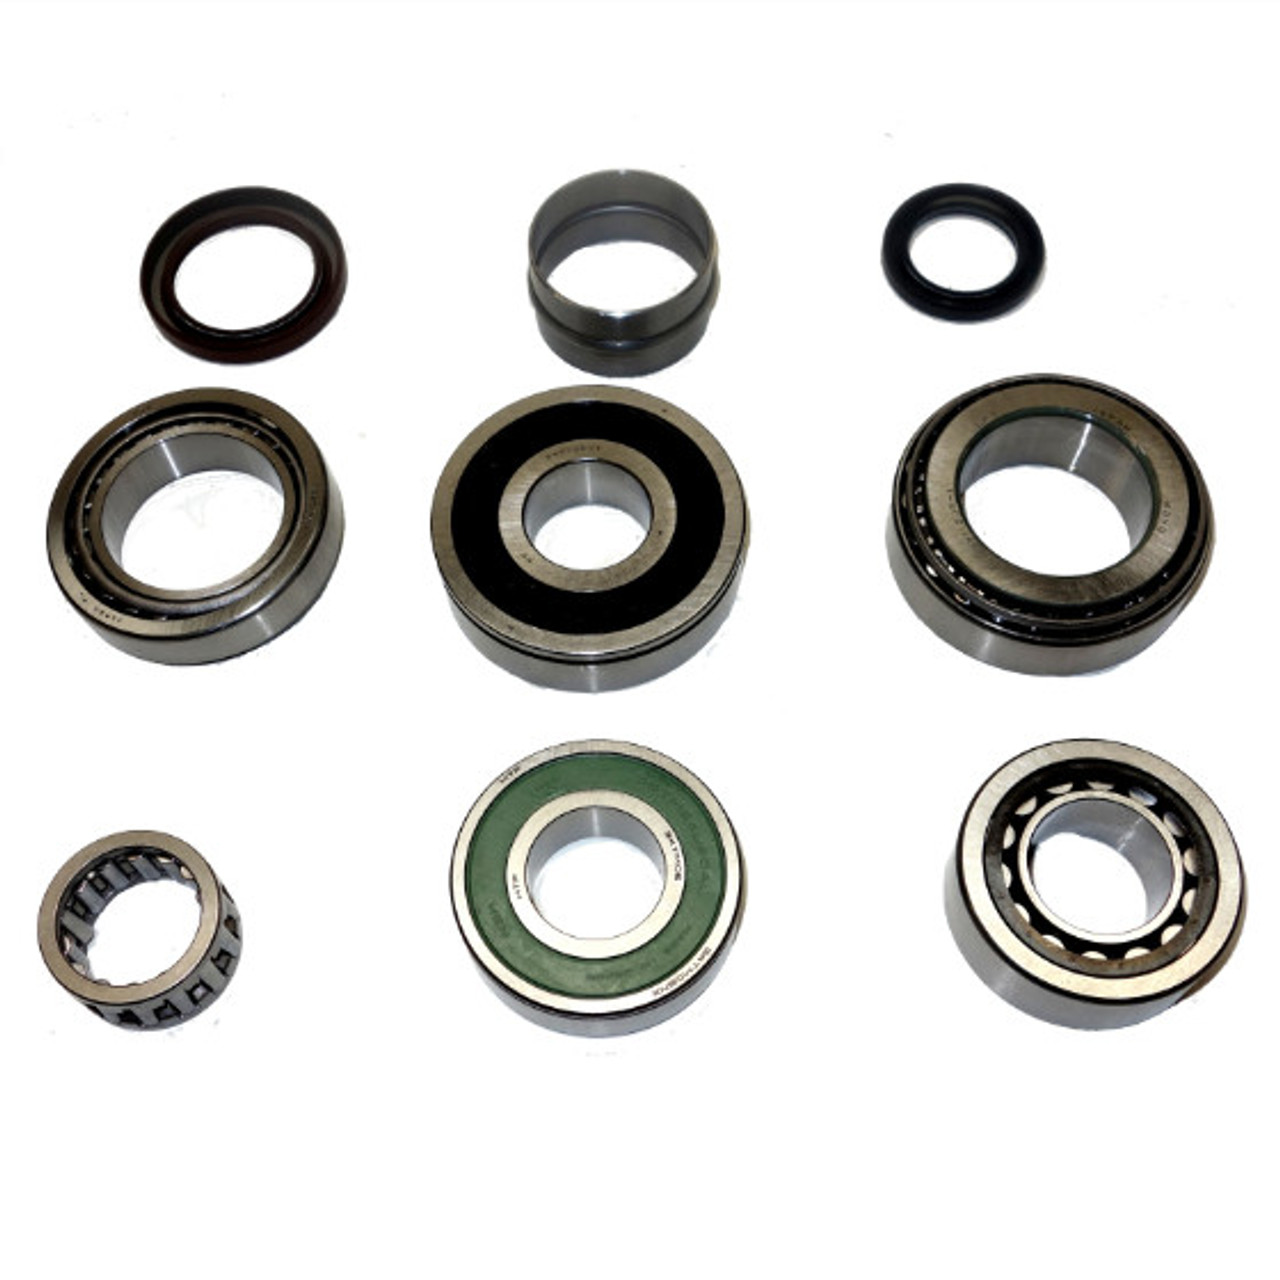 USA Standard Manual Transmission Bearing Kit 2005 Toyota Tacoma 6-SPD 4WD with Synchros